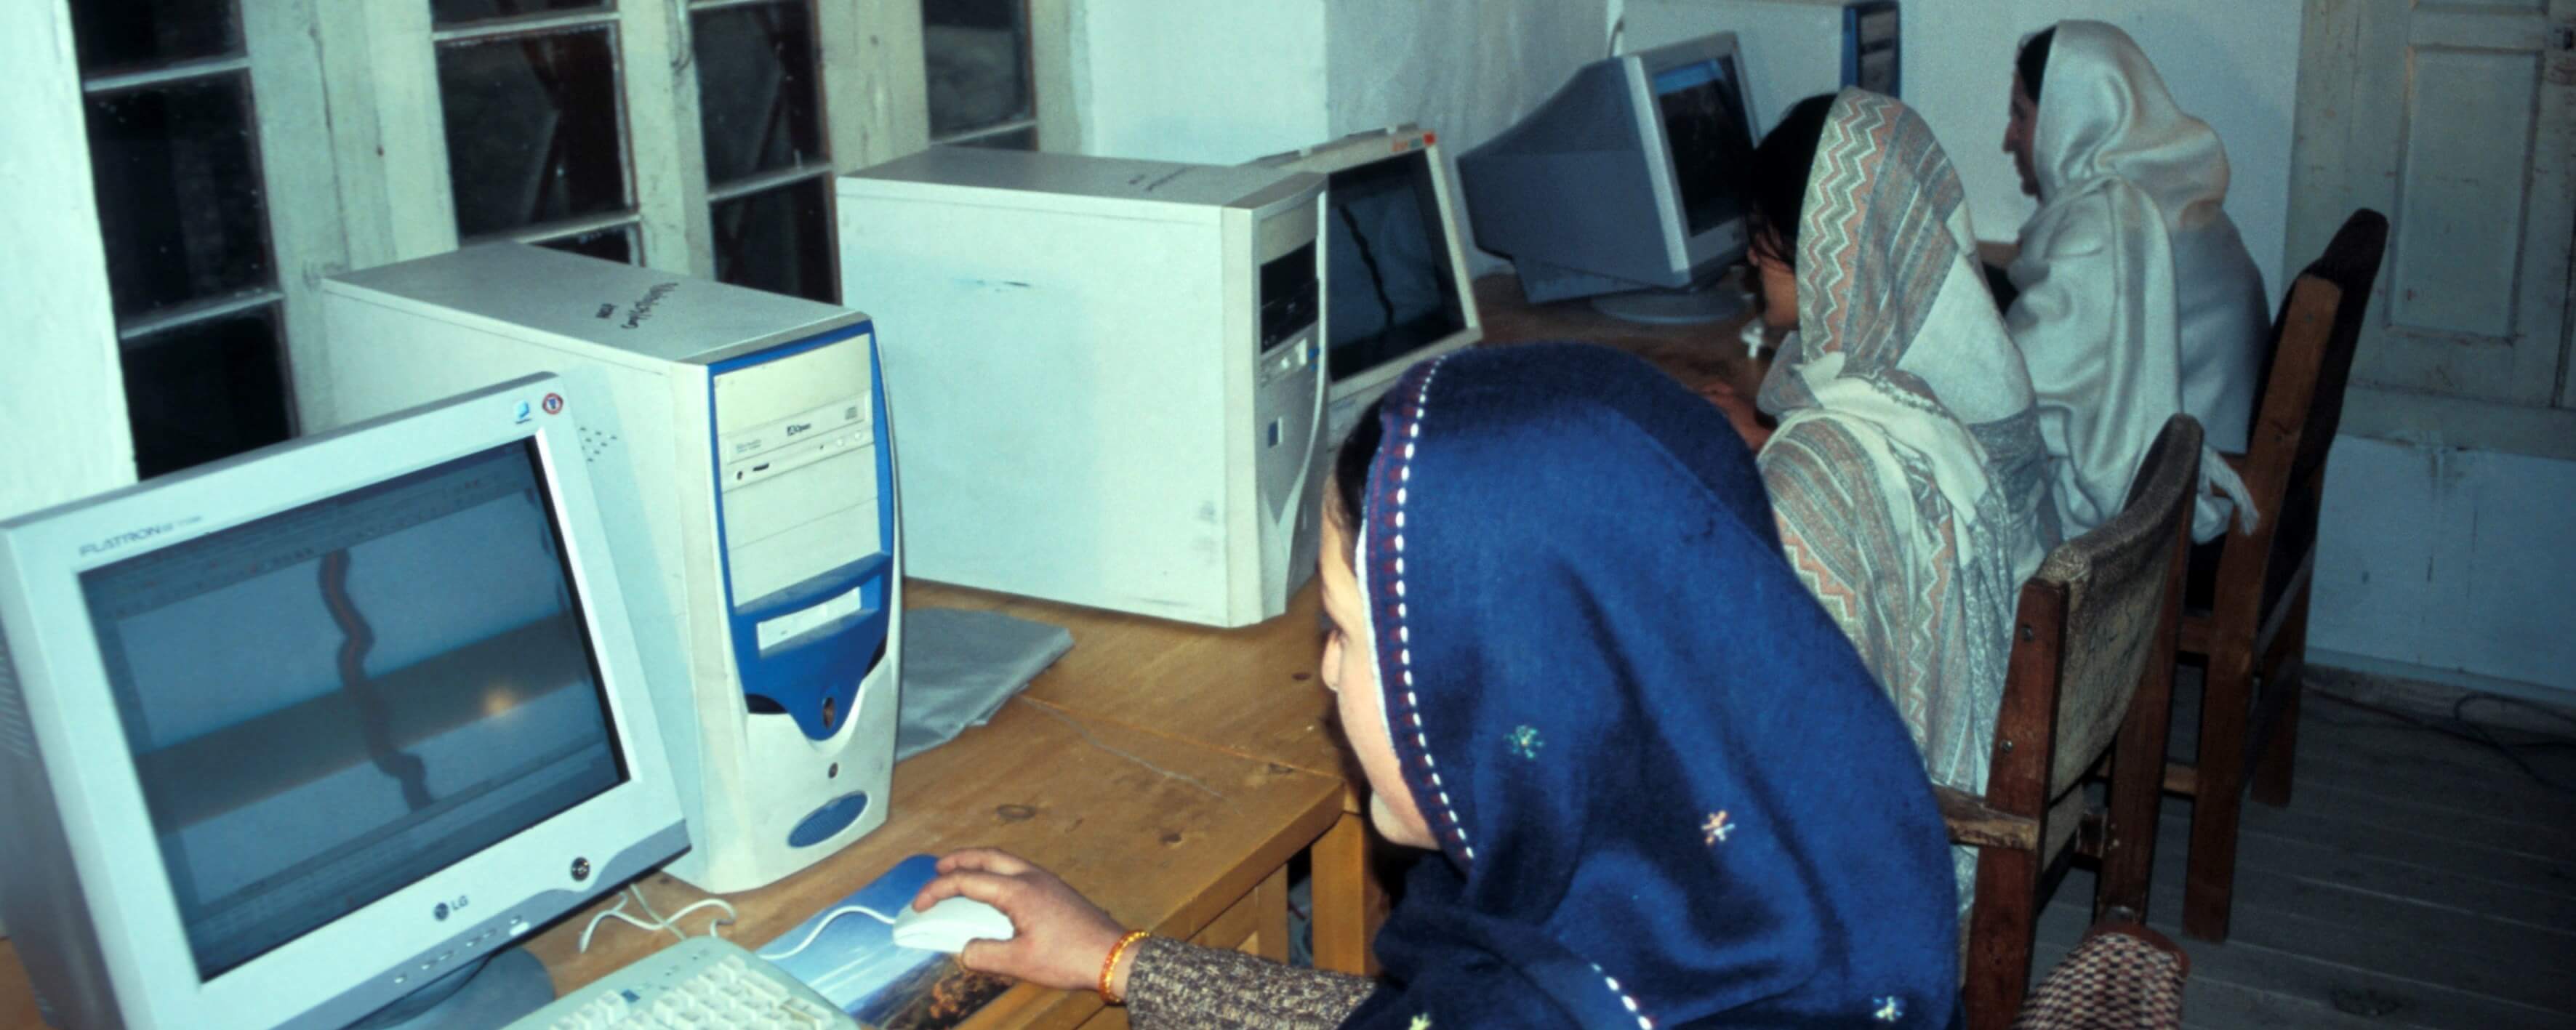 Young women using computers